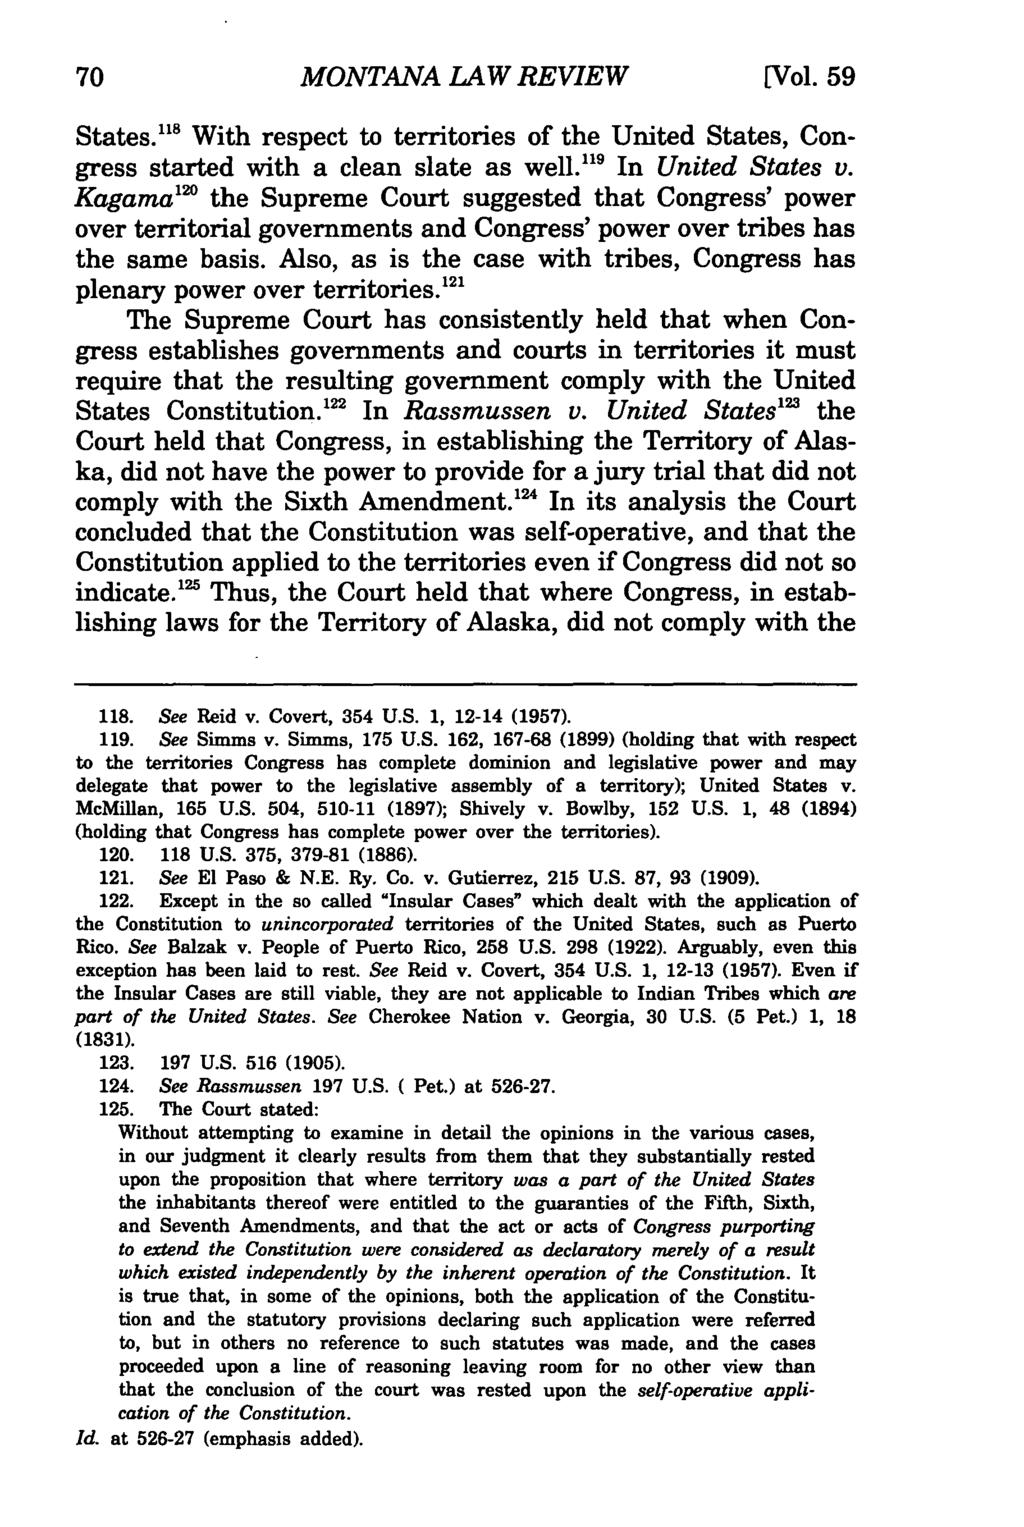 Montana Law Review, Vol. 59 [1998], Iss. 1, Art. 4 MONTANA LAW REVIEW [Vol. 59 States."' With respect to territories of the United States, Congress started with a clean slate as well.